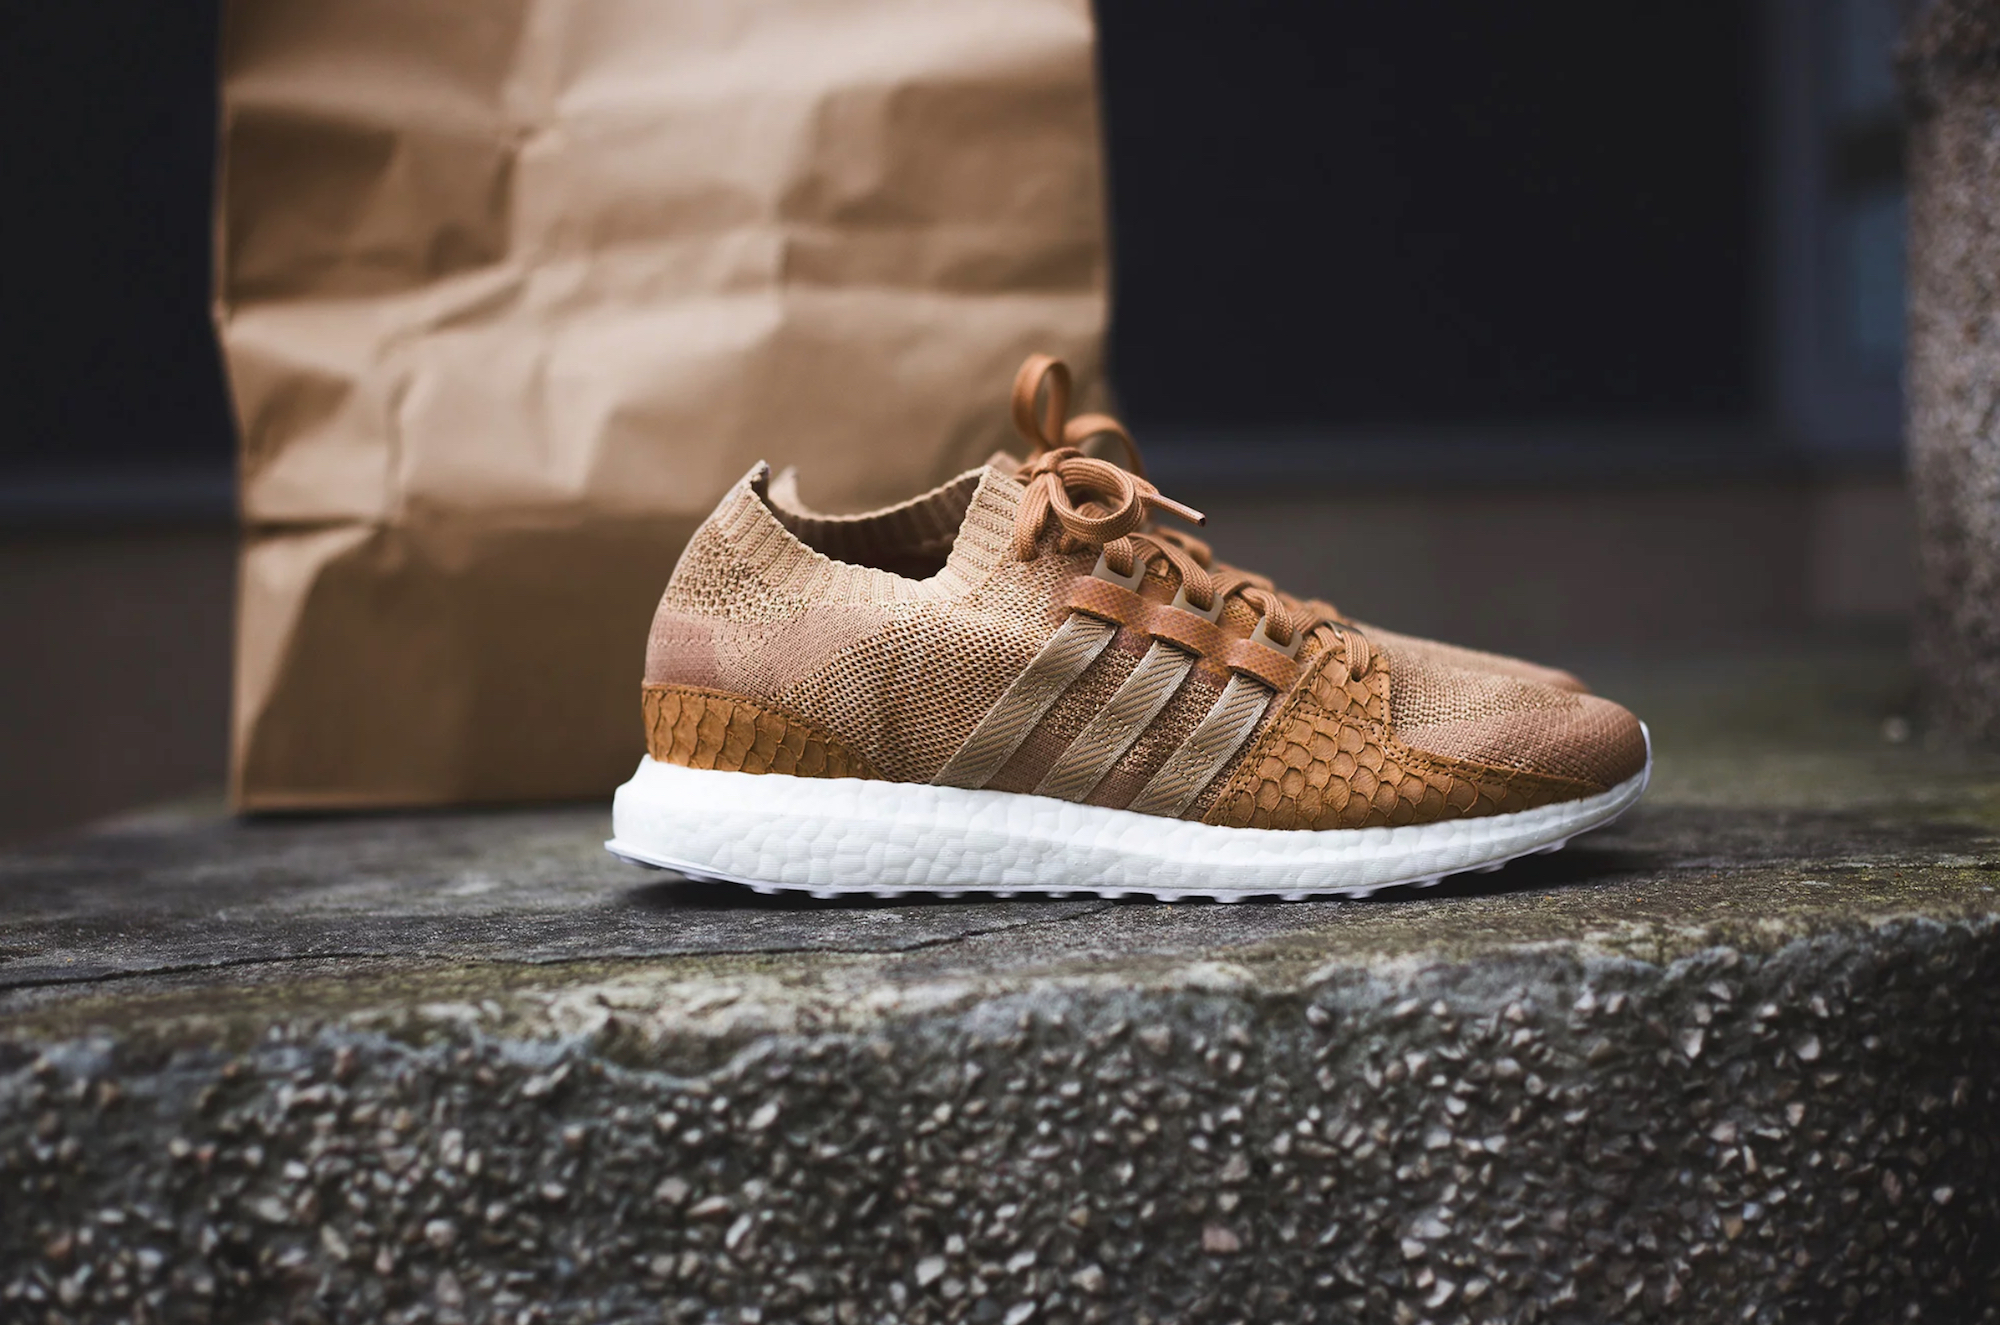 Here's a Better Look at the Pusha T x adidas Boost EQT 'Brown